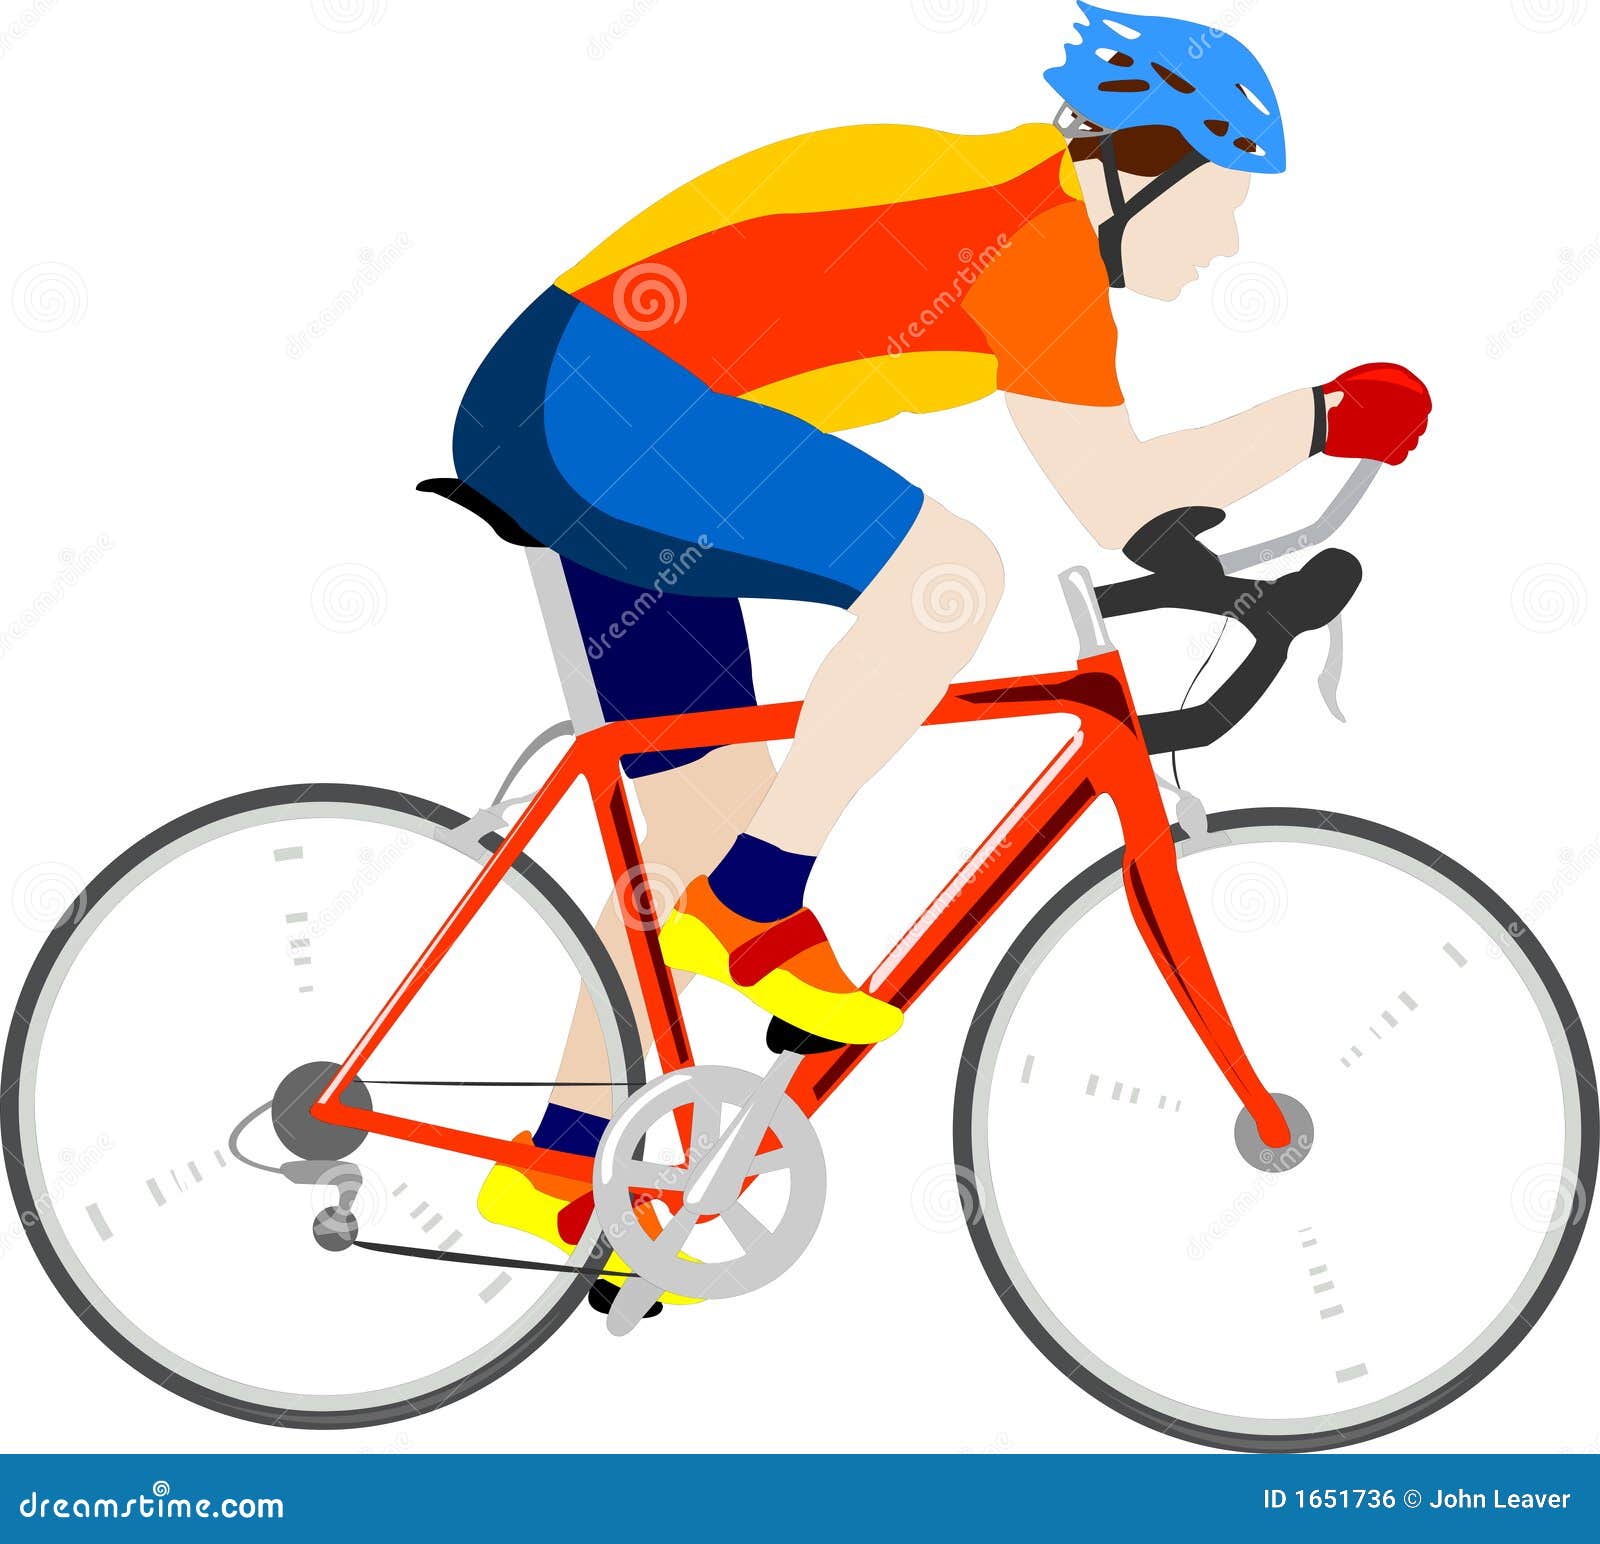 royalty free bicycle clipart - photo #5